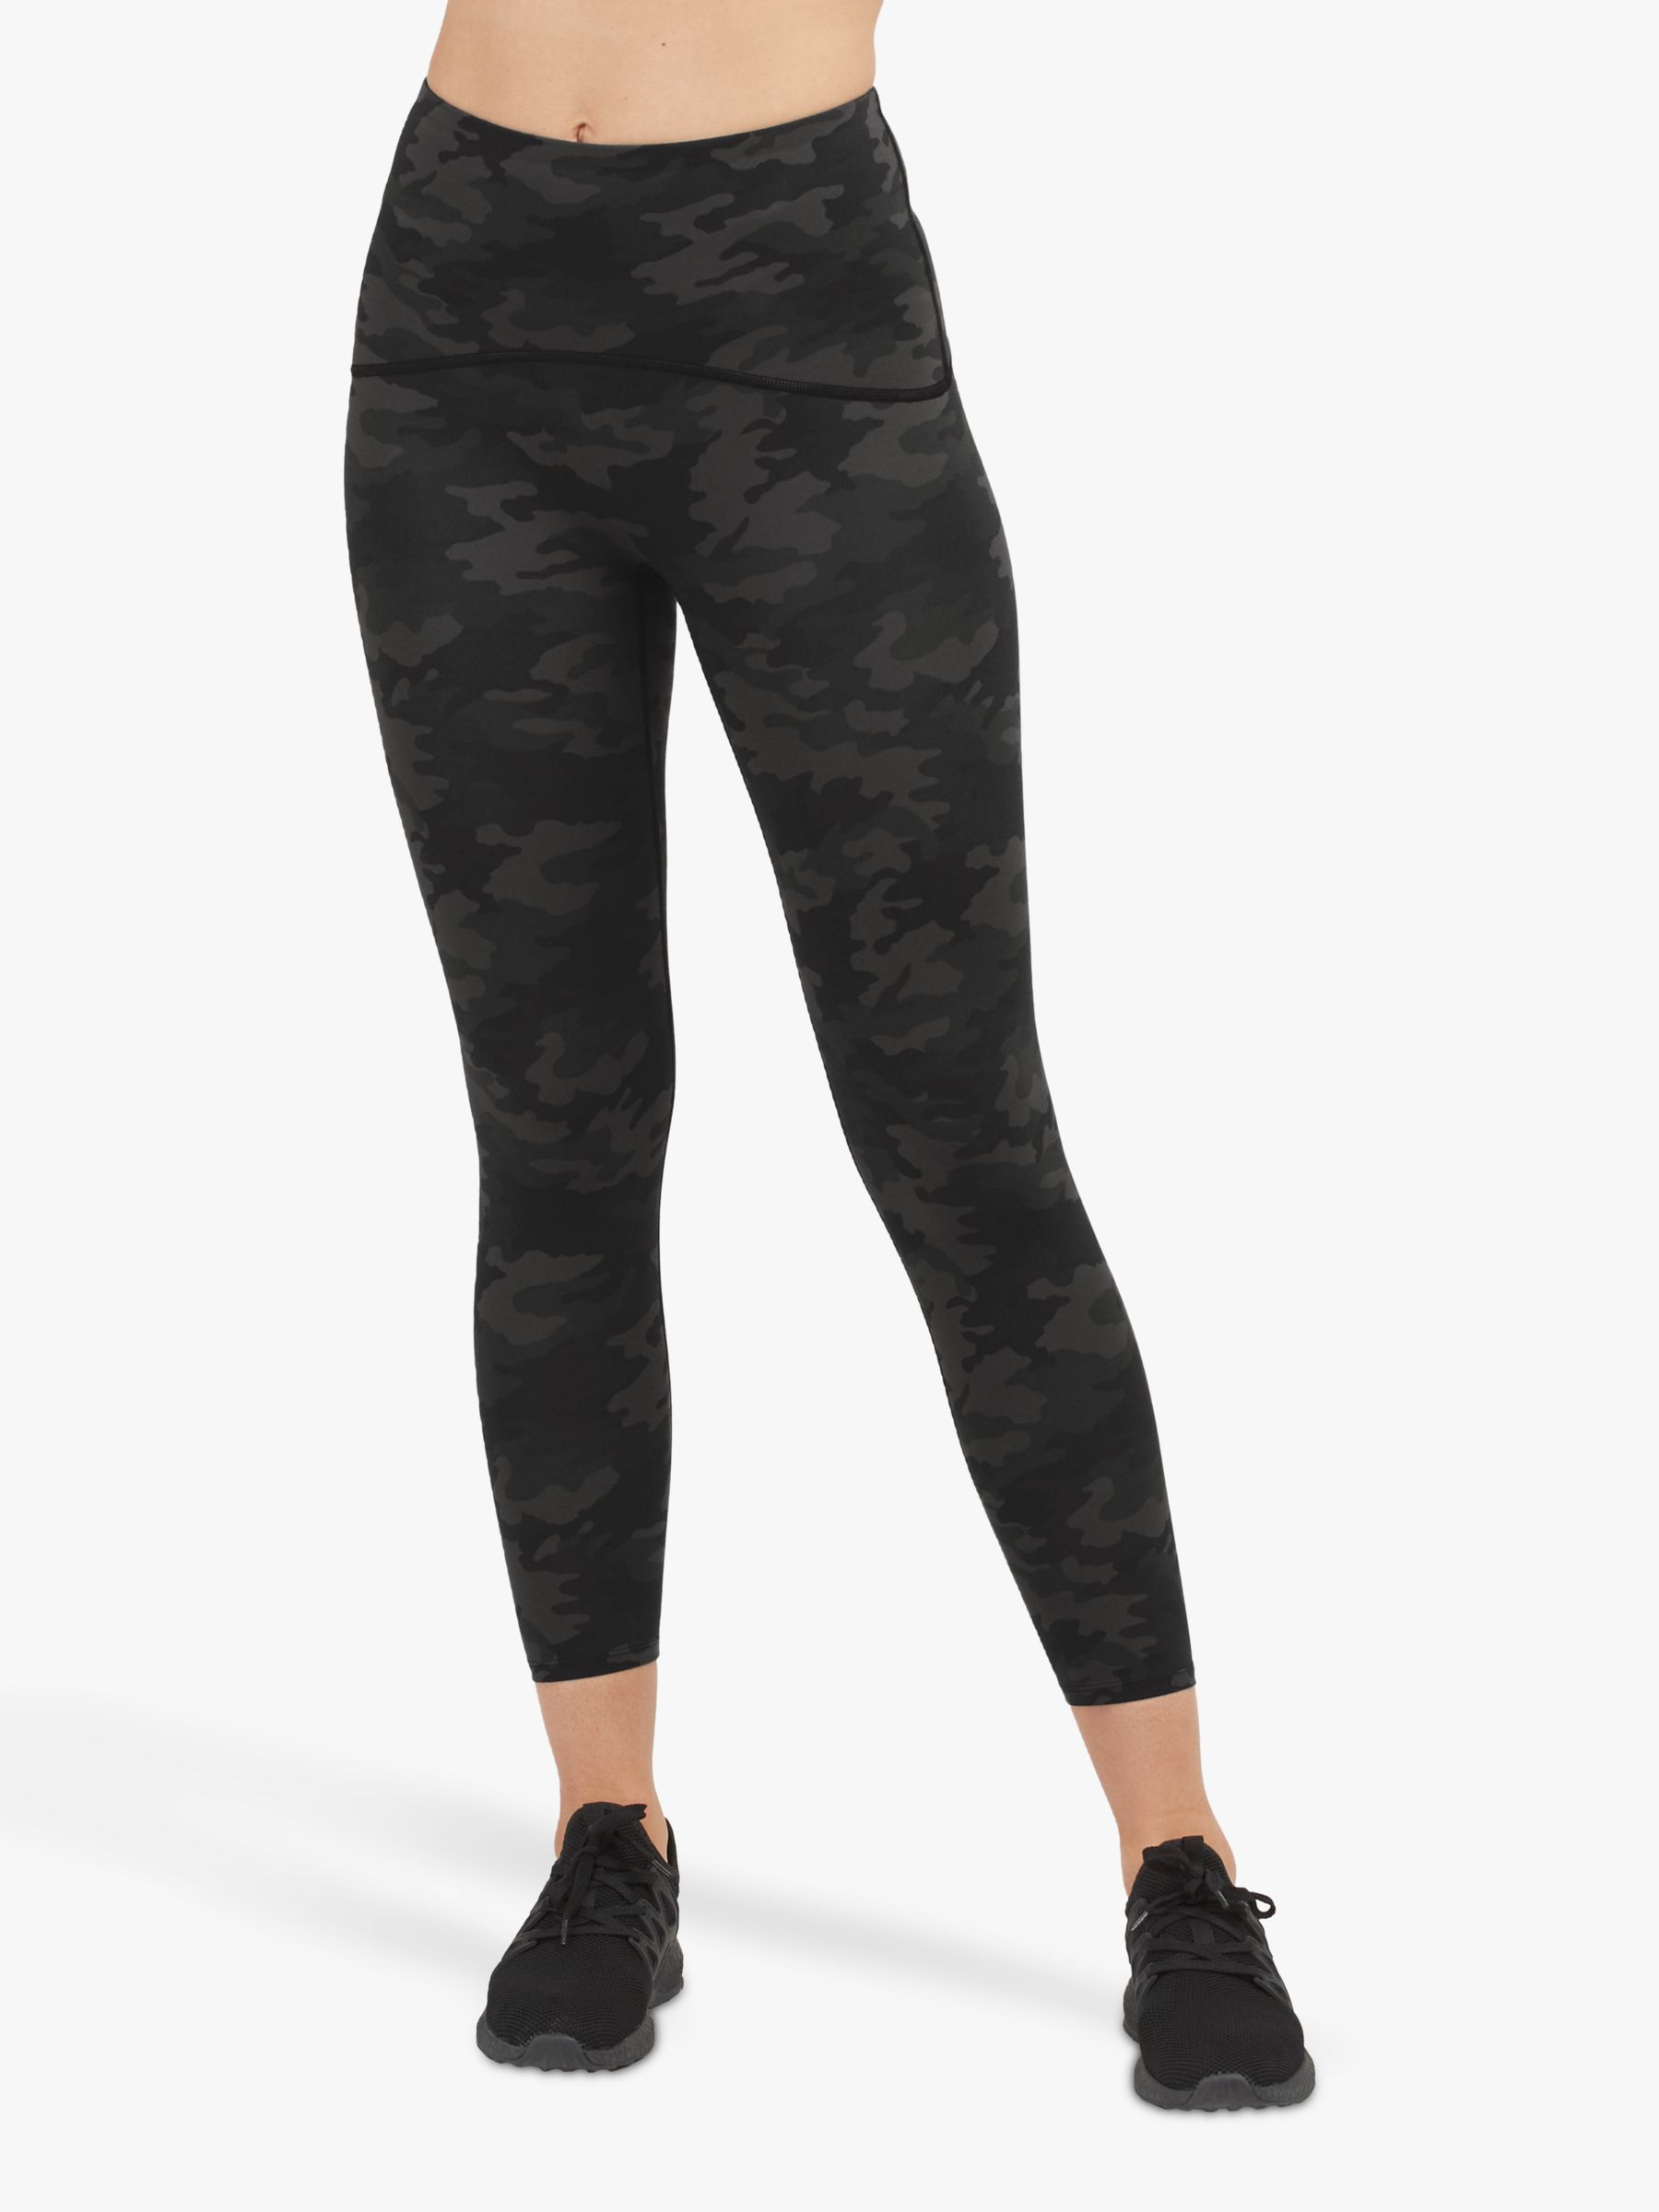 Women's Camo Workout Booty Leggings with High Waist